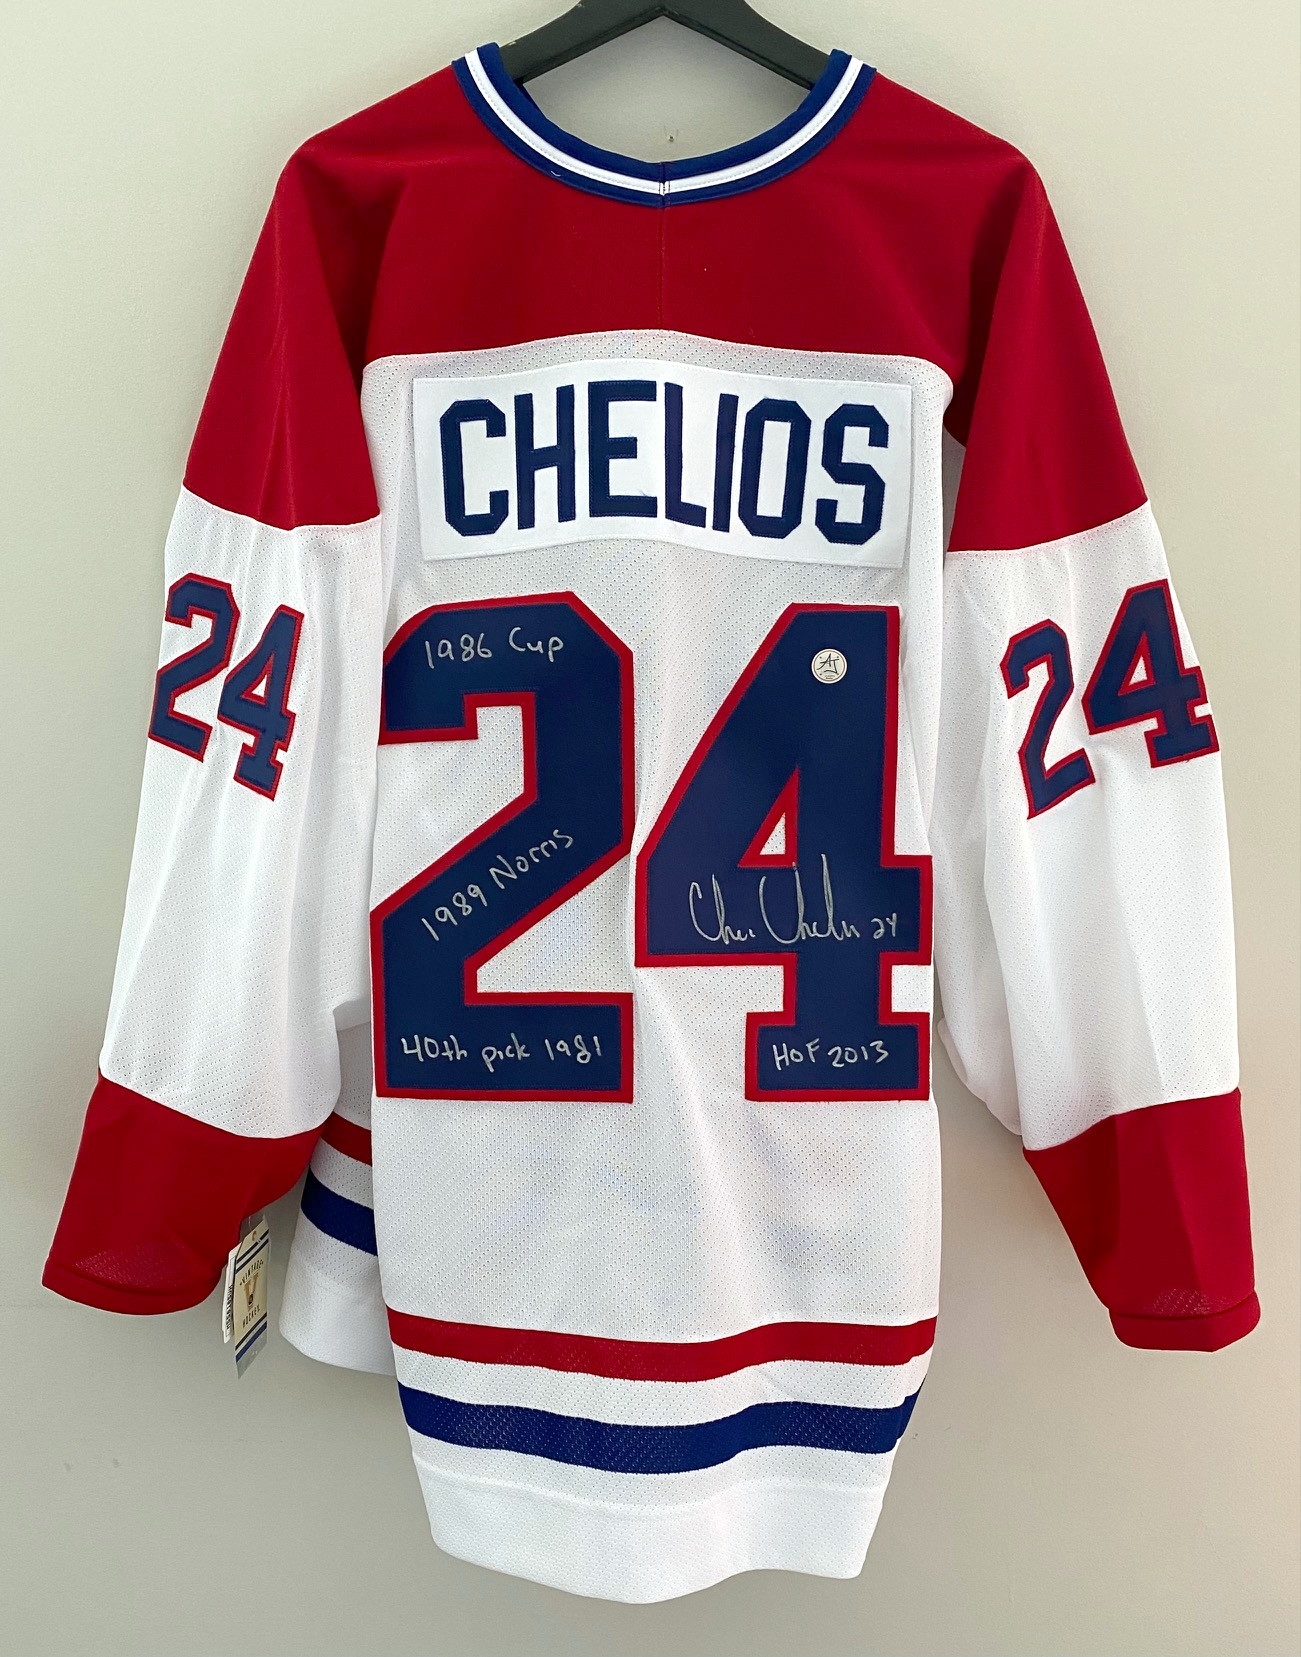 Chris Chelios Montreal Canadiens Signed Vintage CCM Jersey with Career Highlights Noted